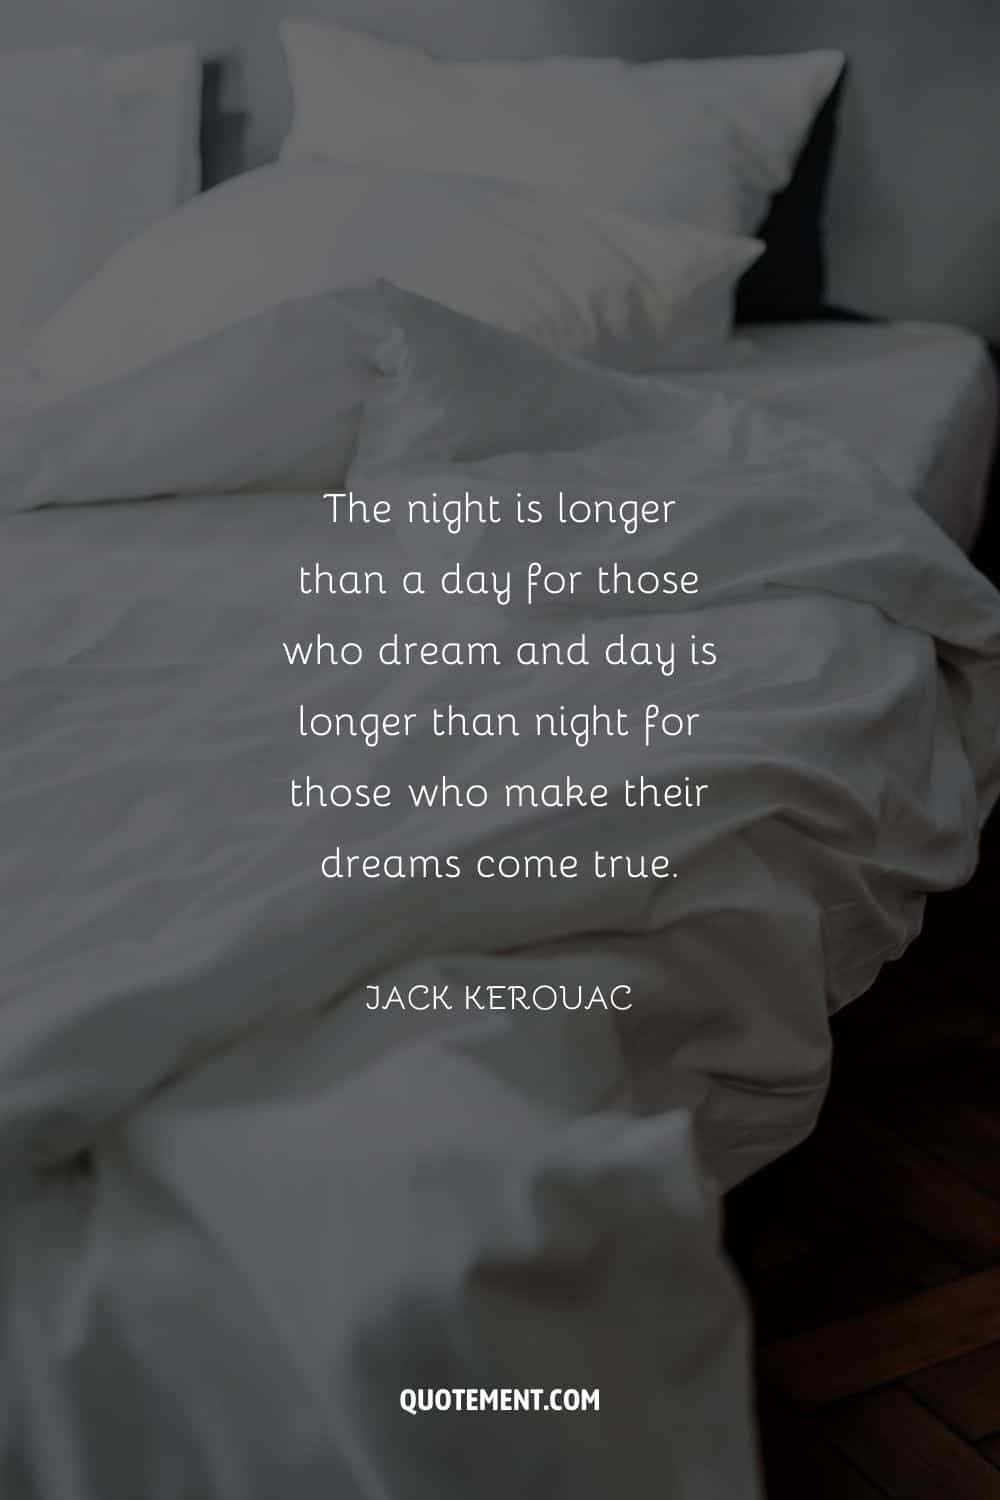 The night is longer than a day for those who dream and day is longer than night for those who make their dreams come true